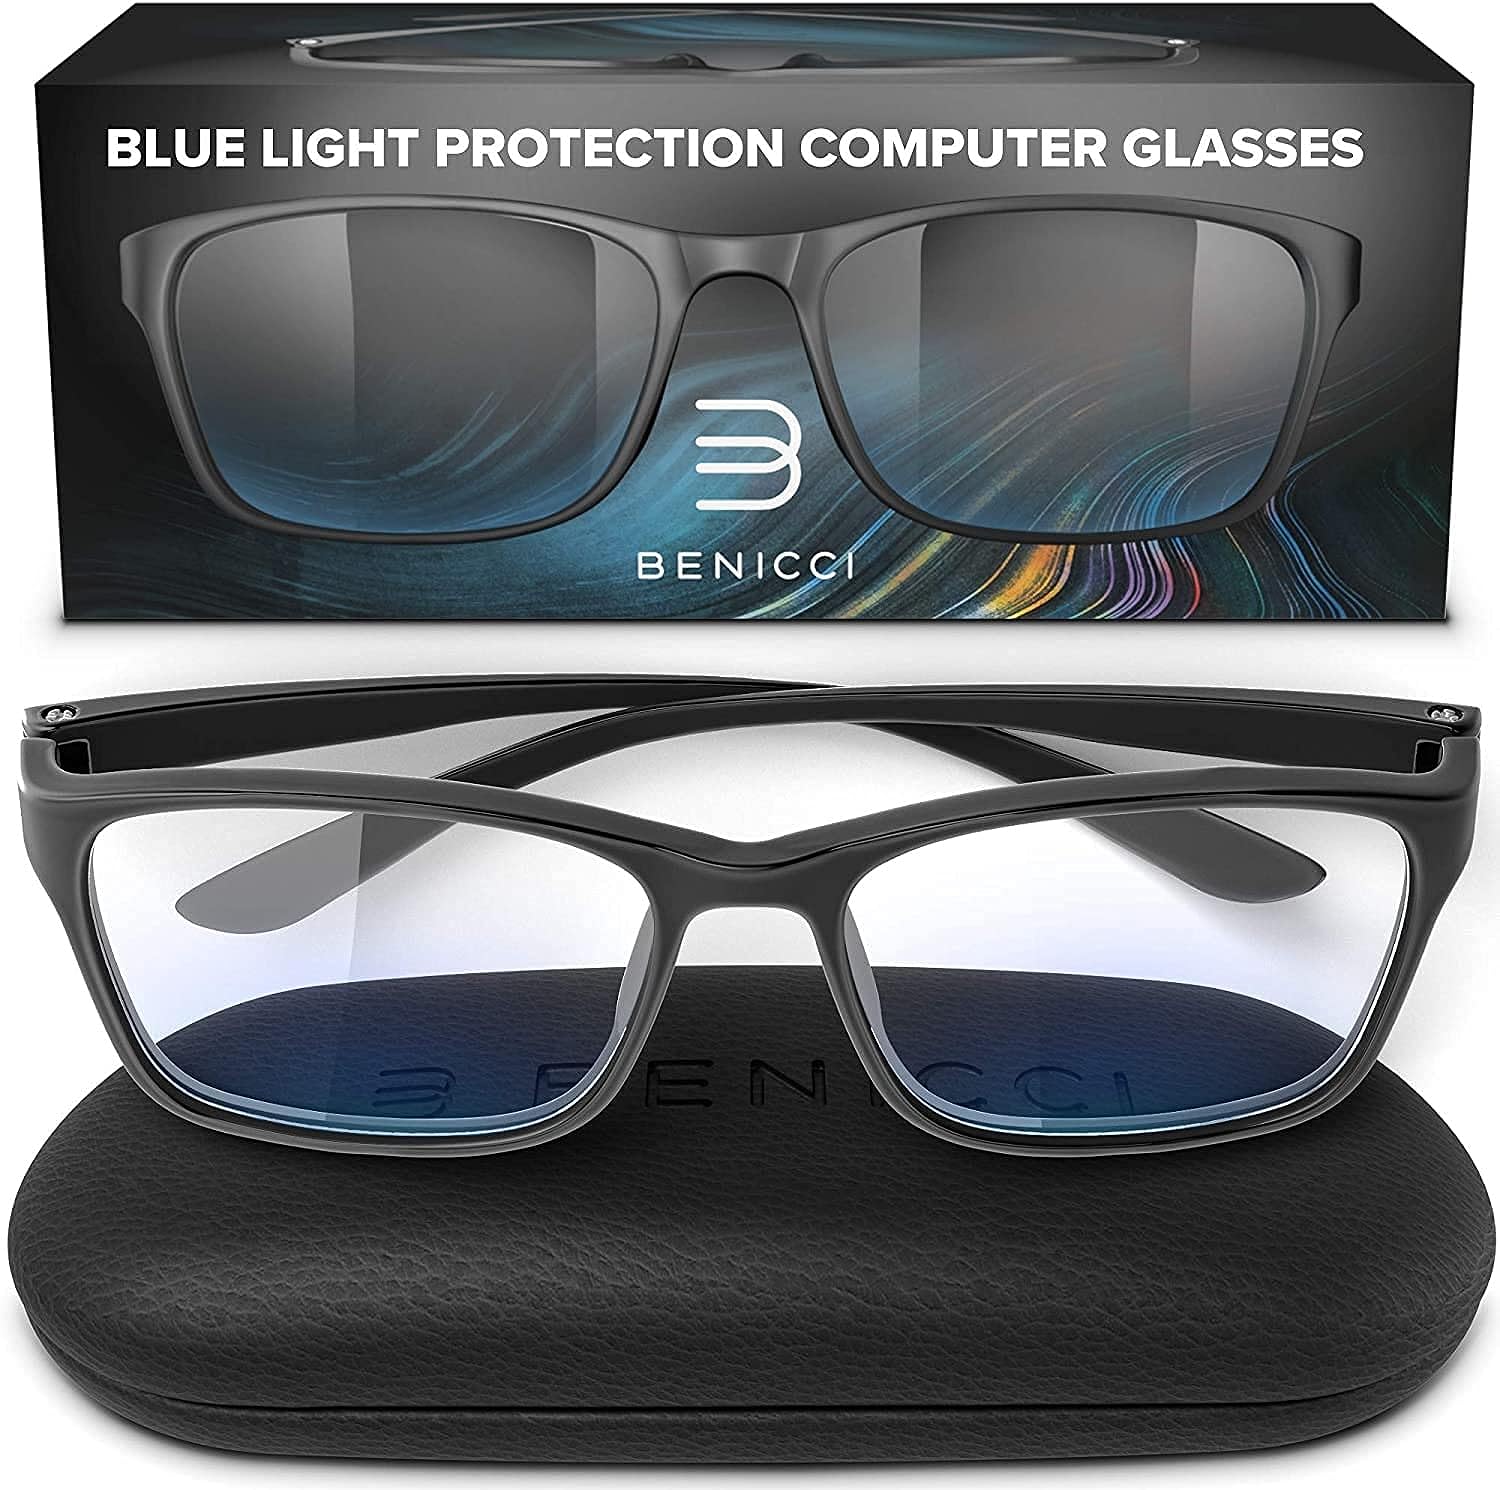 Stylish Blue Light Blocking Glasses for Women or Men - Ease Computer and Digital Eye Strain, Dry Eyes, Headaches and Blurry Vision - Instantly Blocks Glare from Computers and Phone Screens wCase